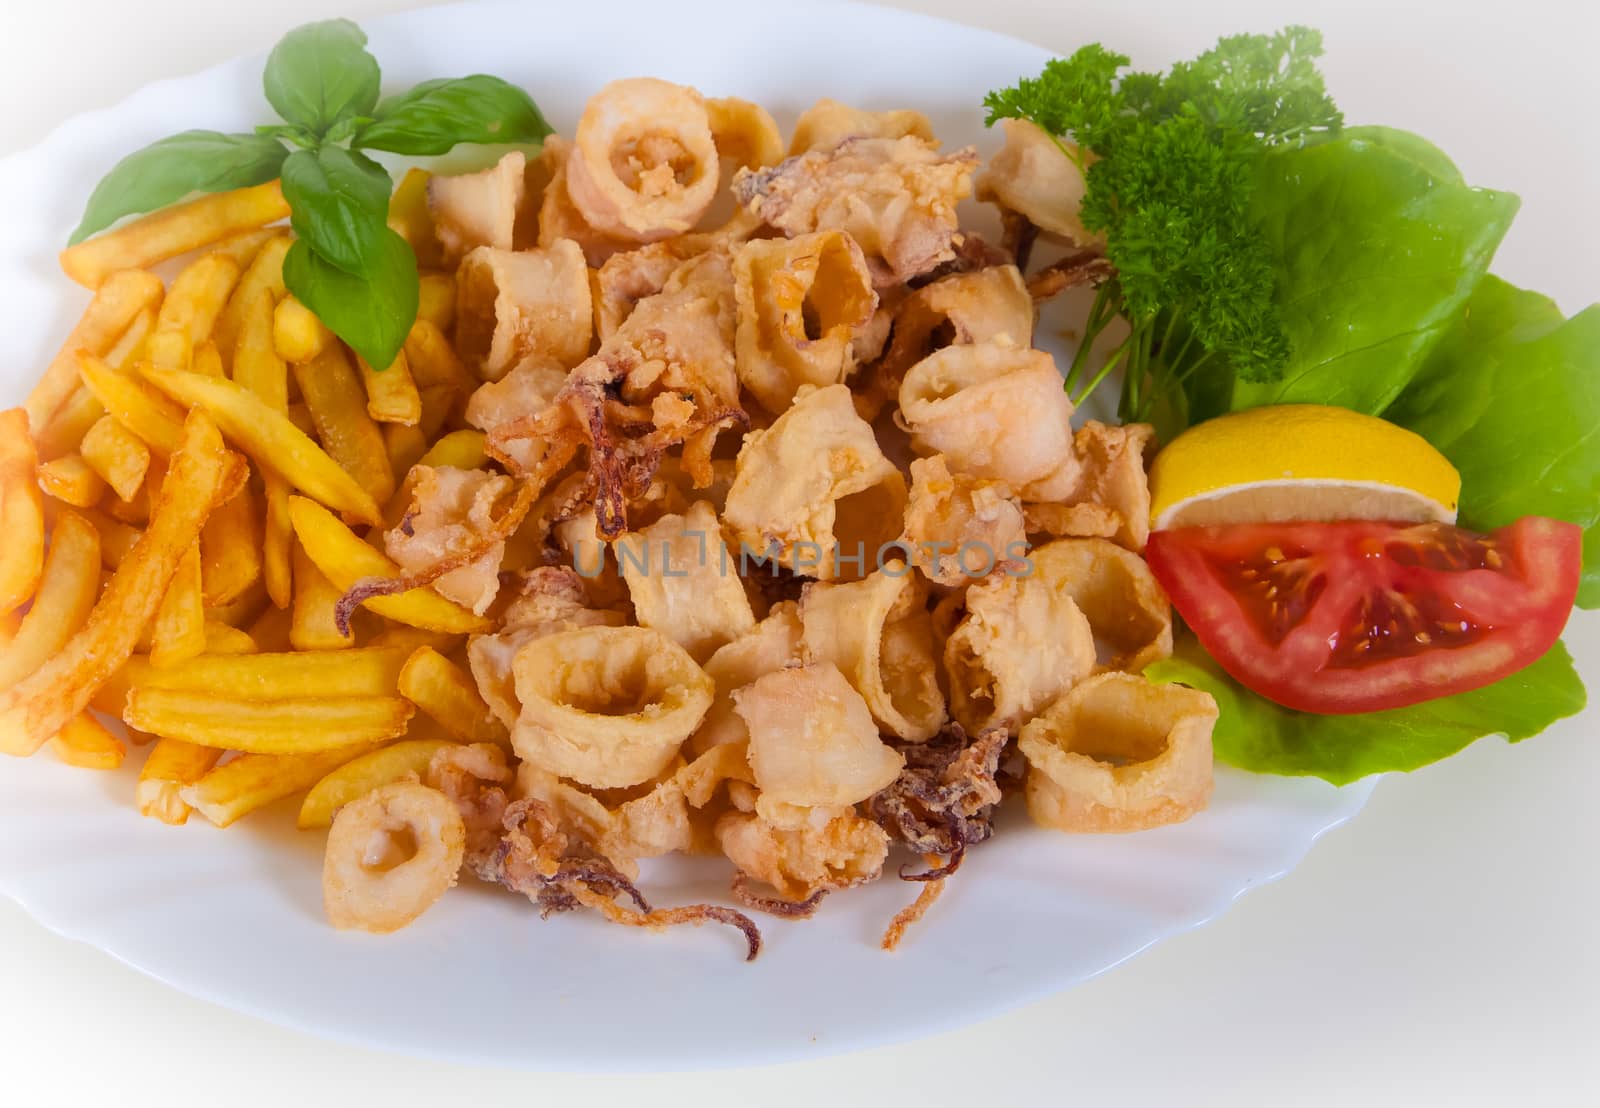 fried calamari, fried squid with lemon and french fries